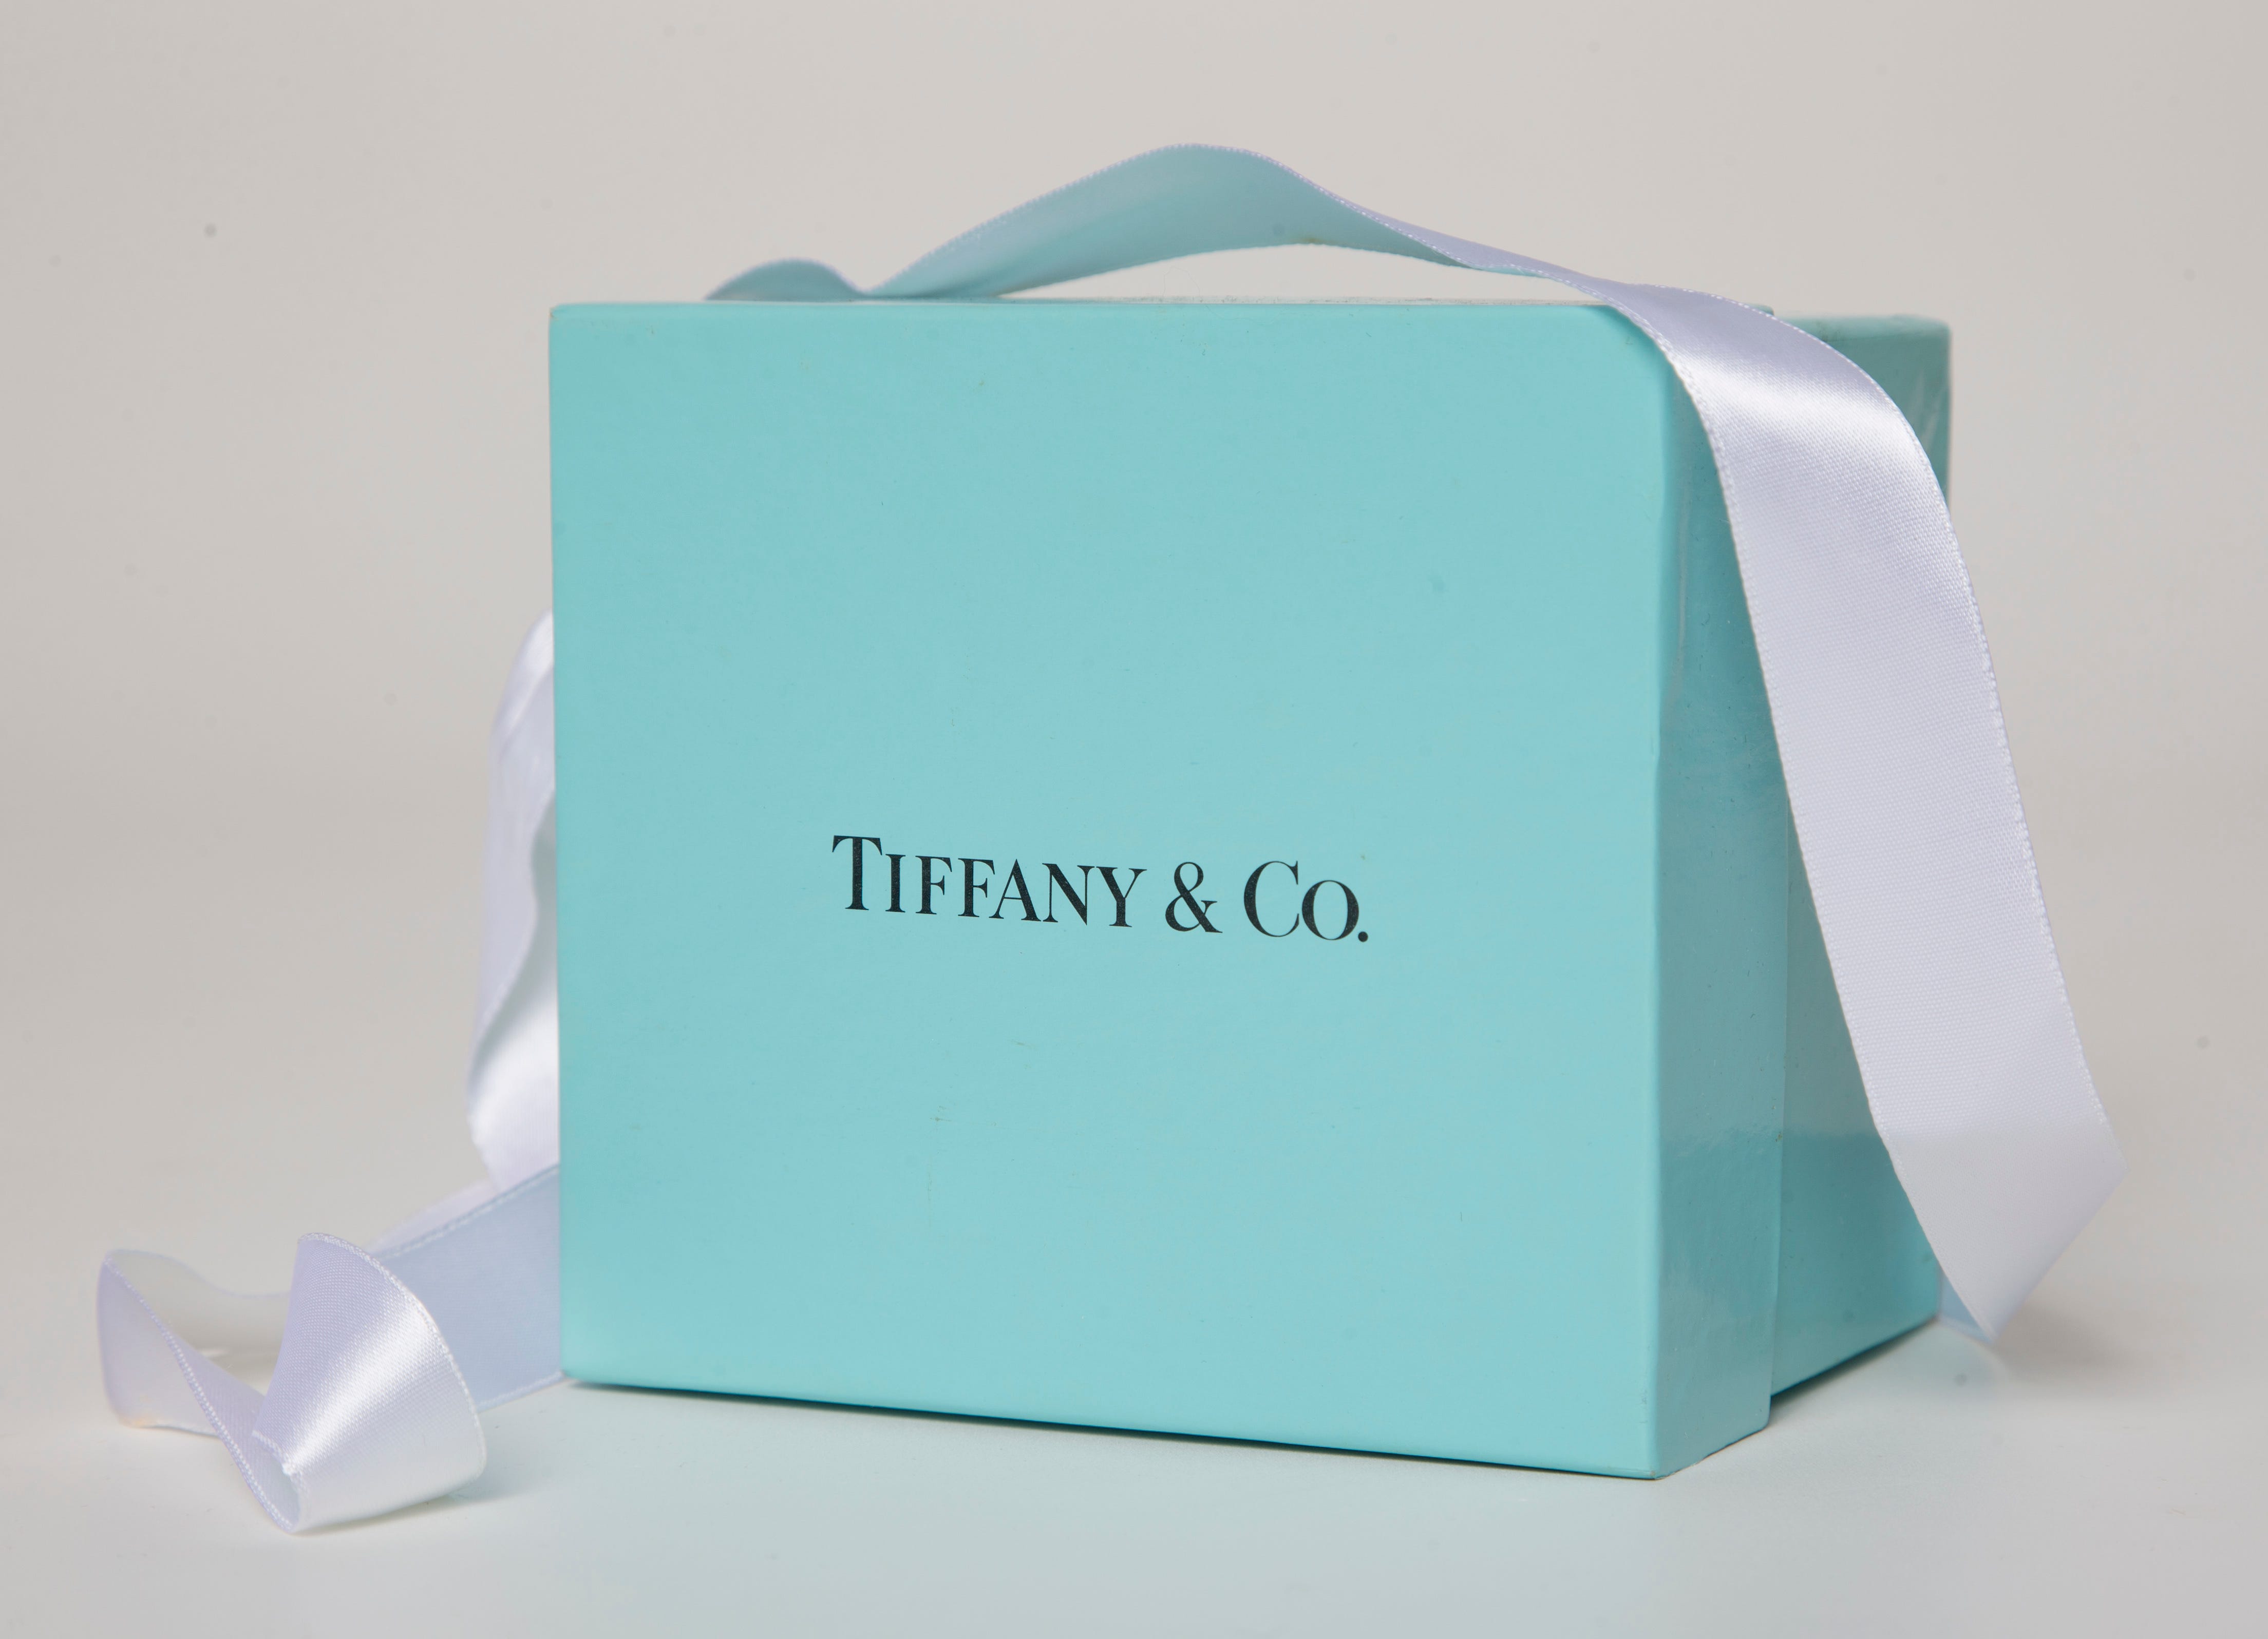 tiffany and co news articles